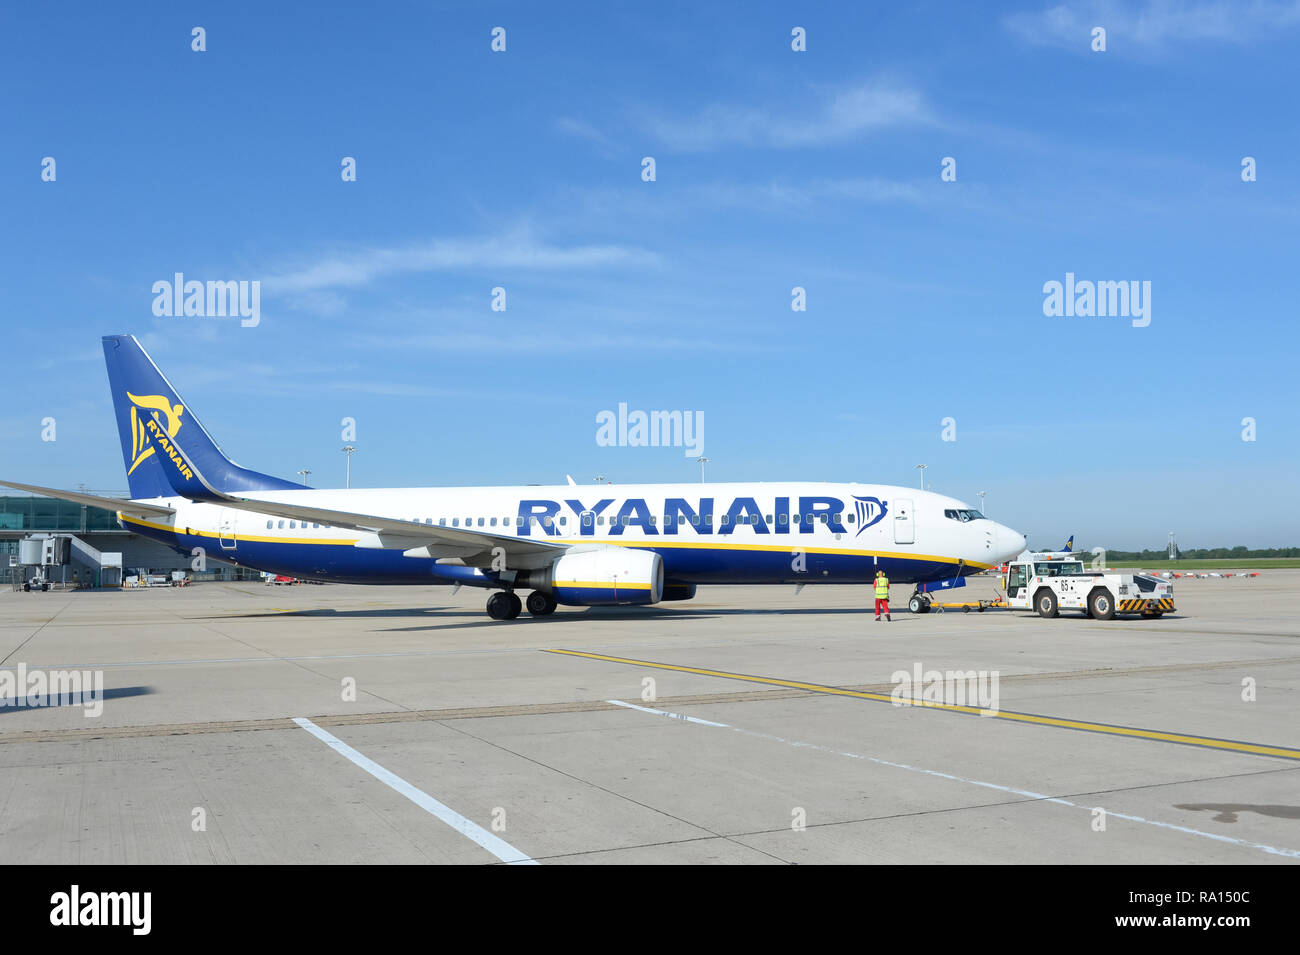 Boeing 737 used by Ryanair on the tarmac at Glasgow Airport, Scotland, UK. Stock Photo